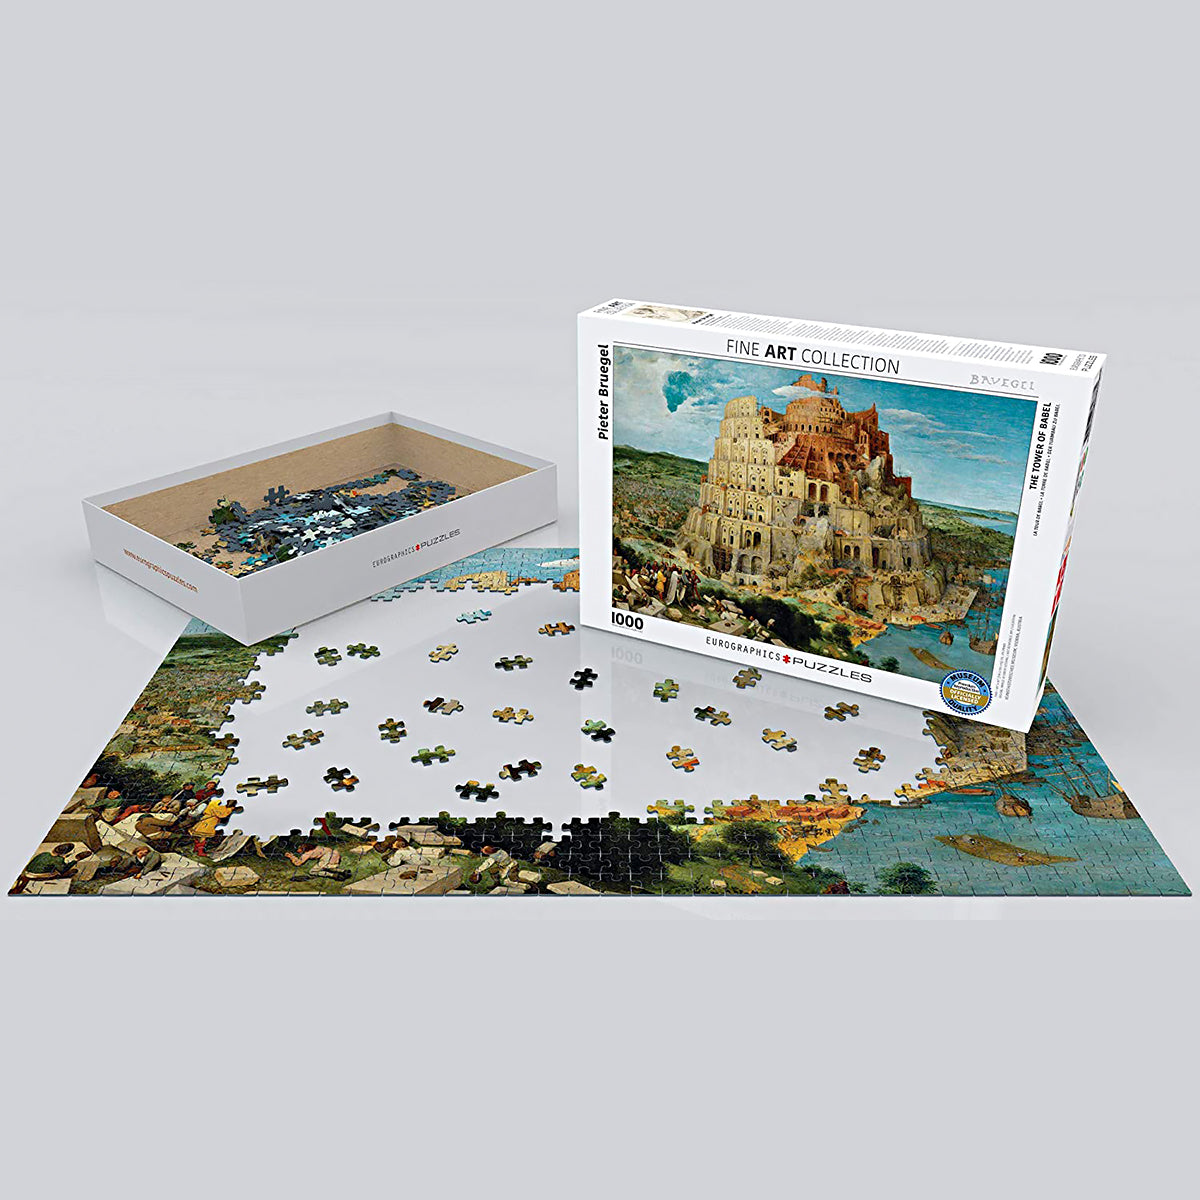 Eurographics' Tower Of Babel Jigsaw Puzzle: A finely crafted 1000-piece challenge featuring Pieter Bruegel's iconic artwork